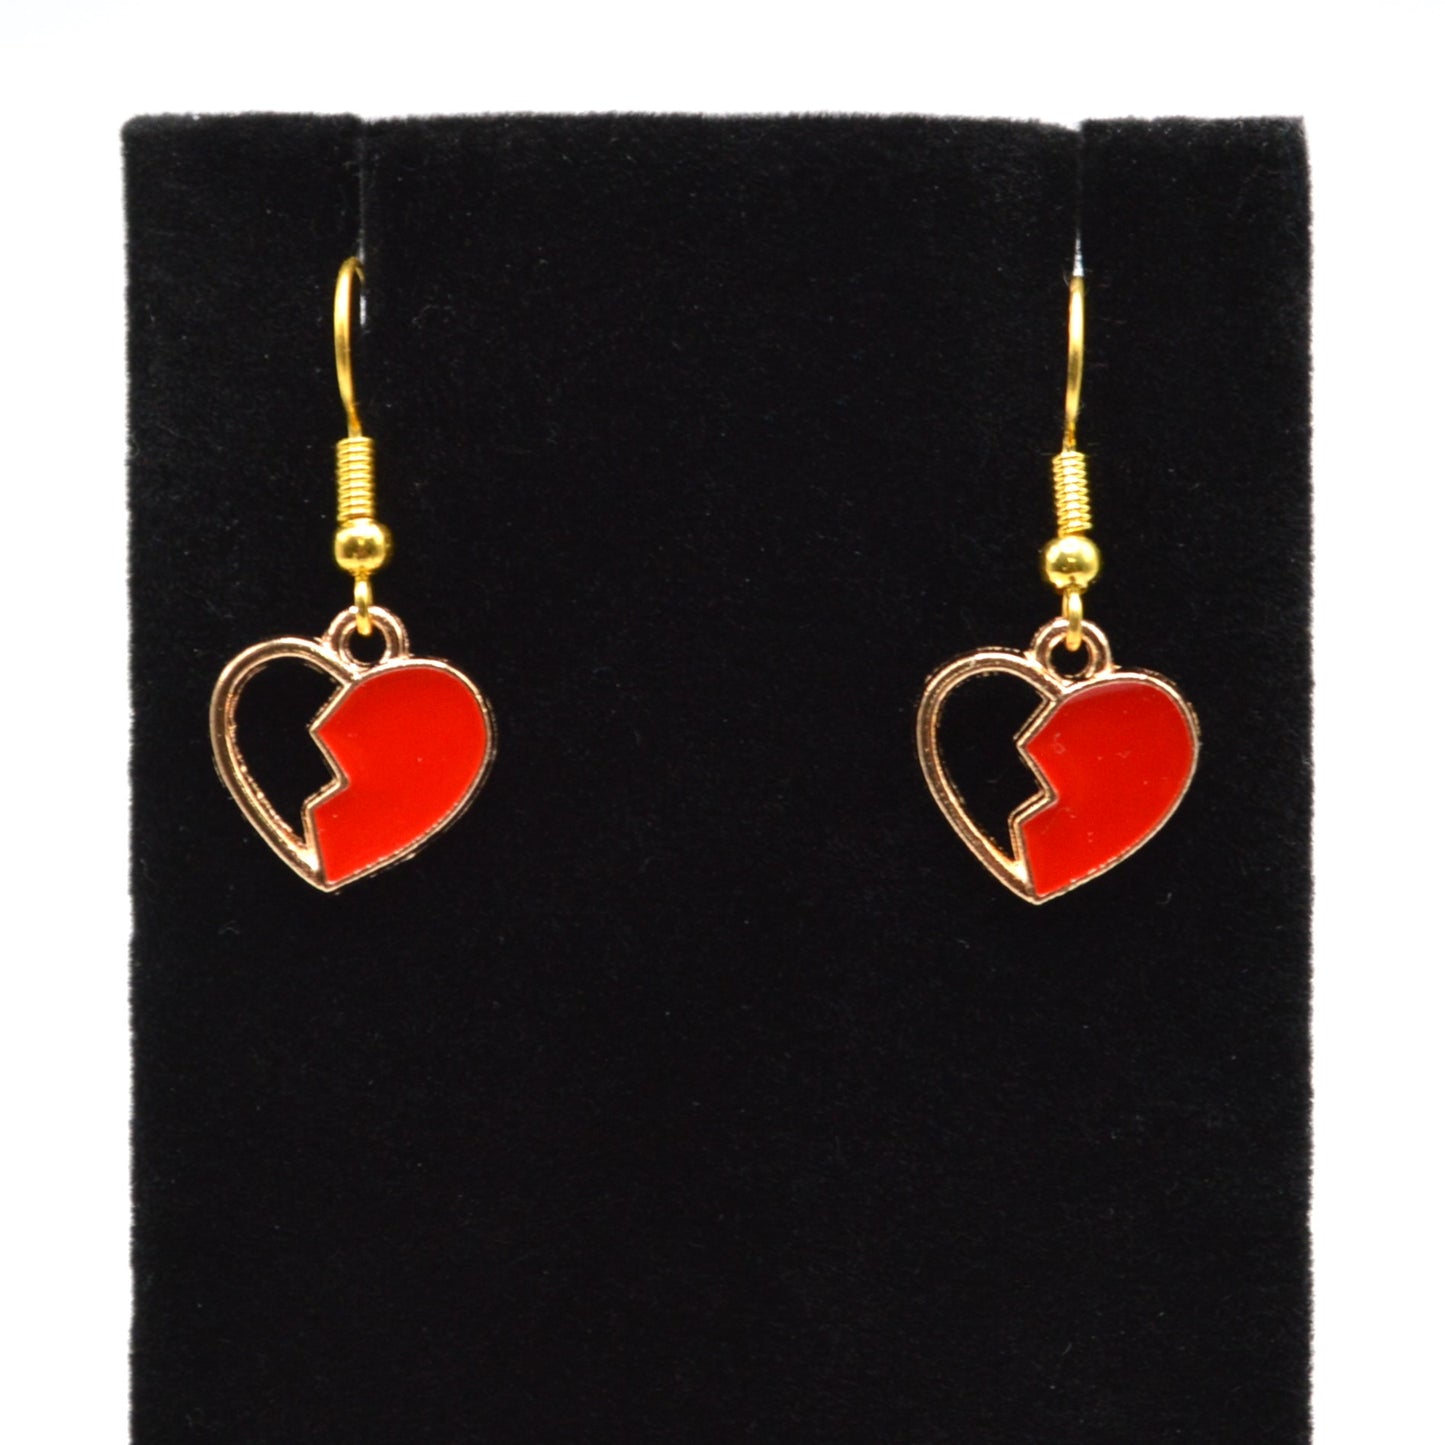 Red Heart with Cutout Earrings